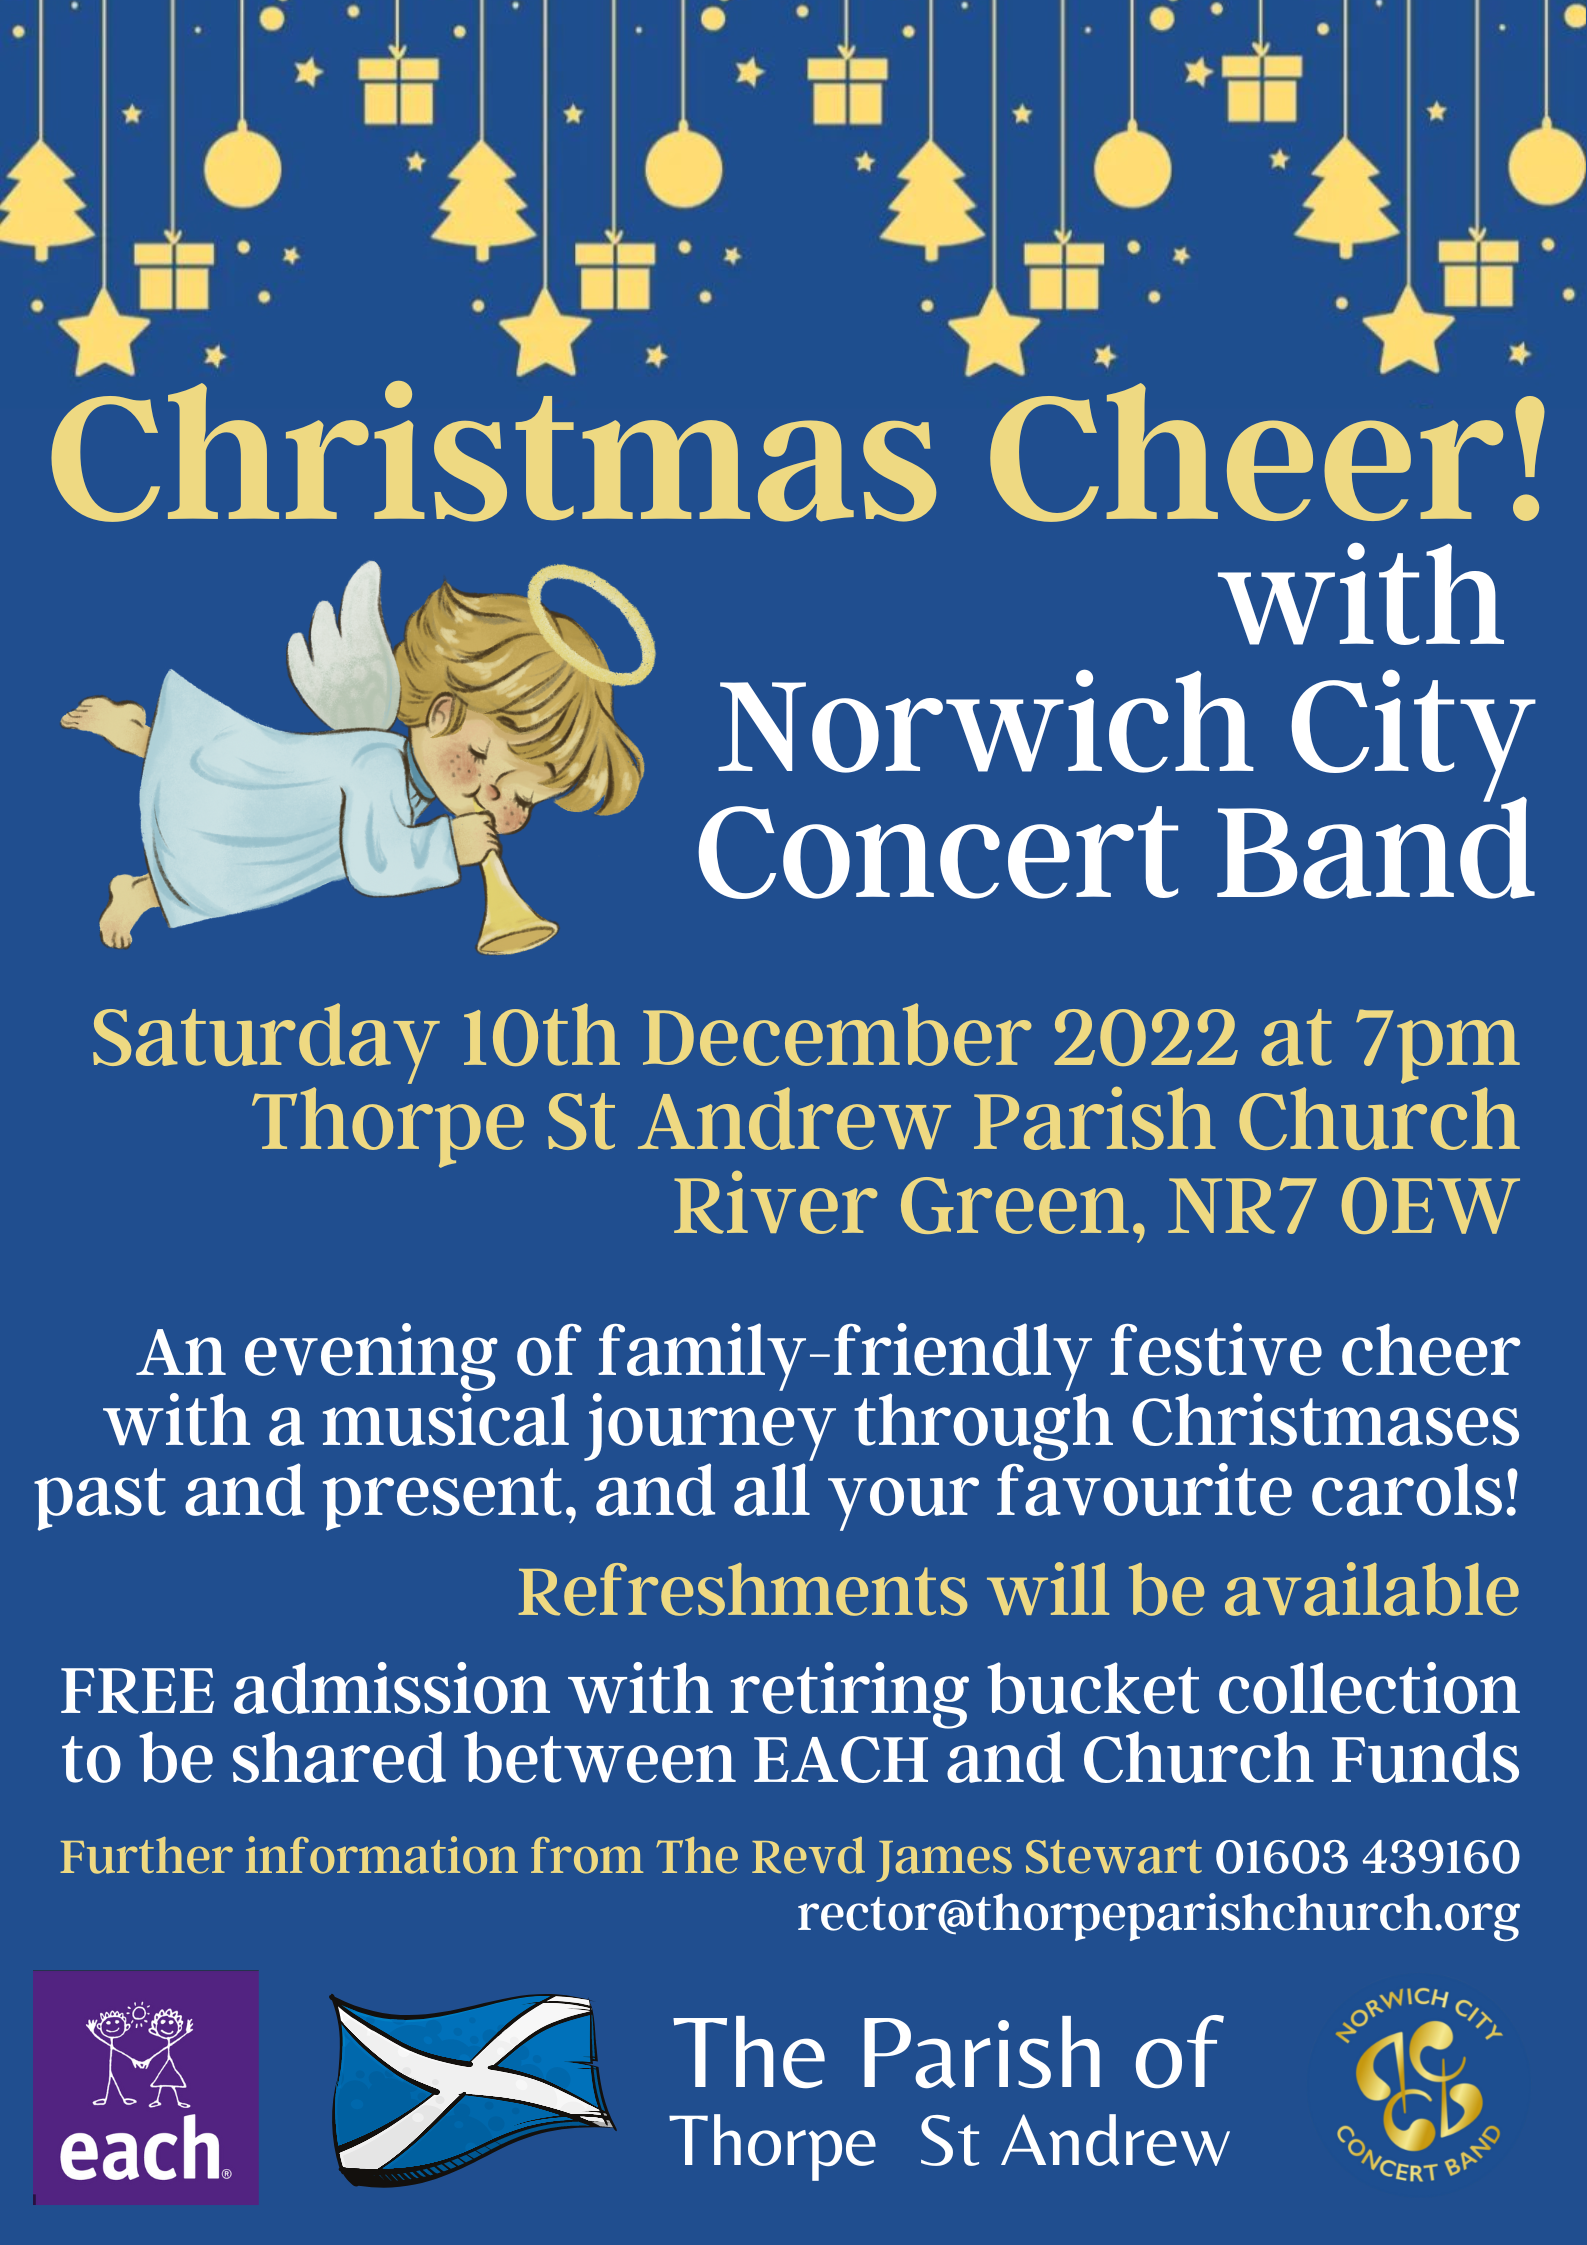 Christmas Cheer! A Concert from the Norwich City Concert Band